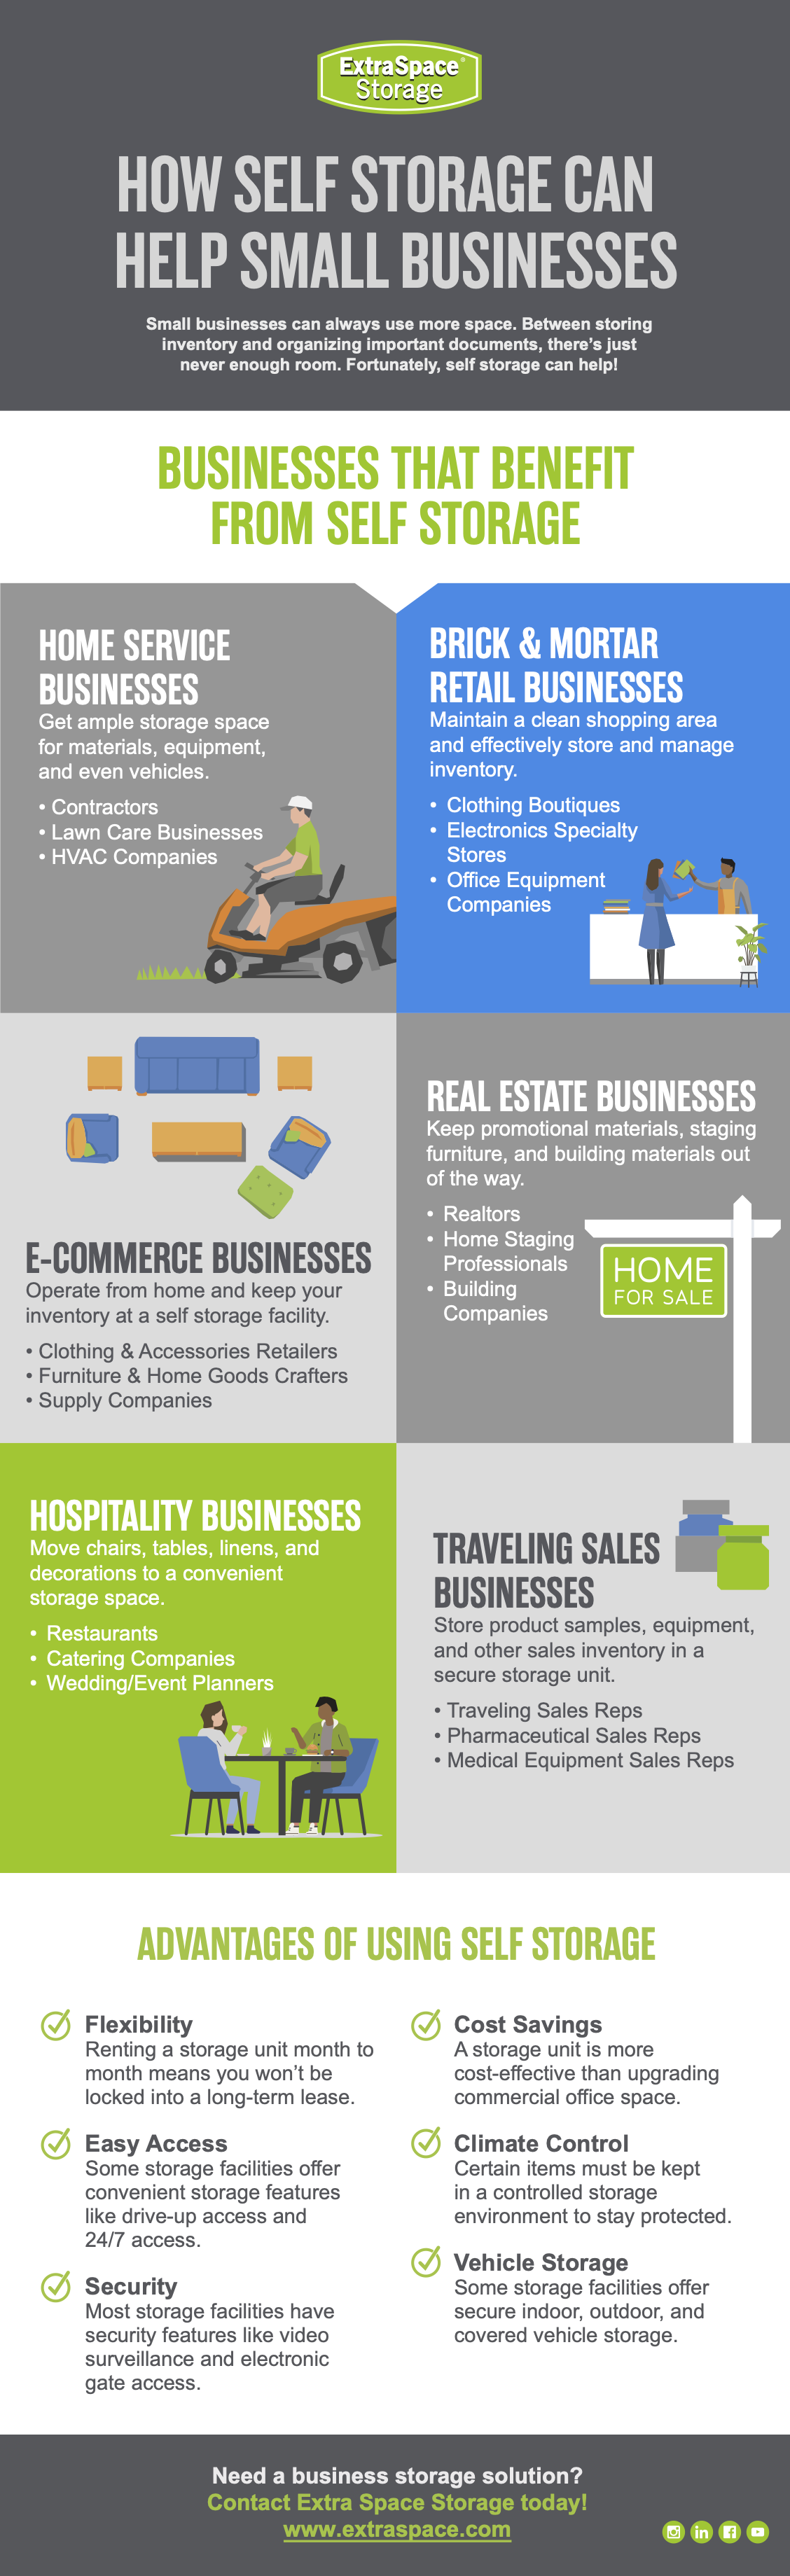 Infographic Showcasing How Self Storage Can Help Small Businesses